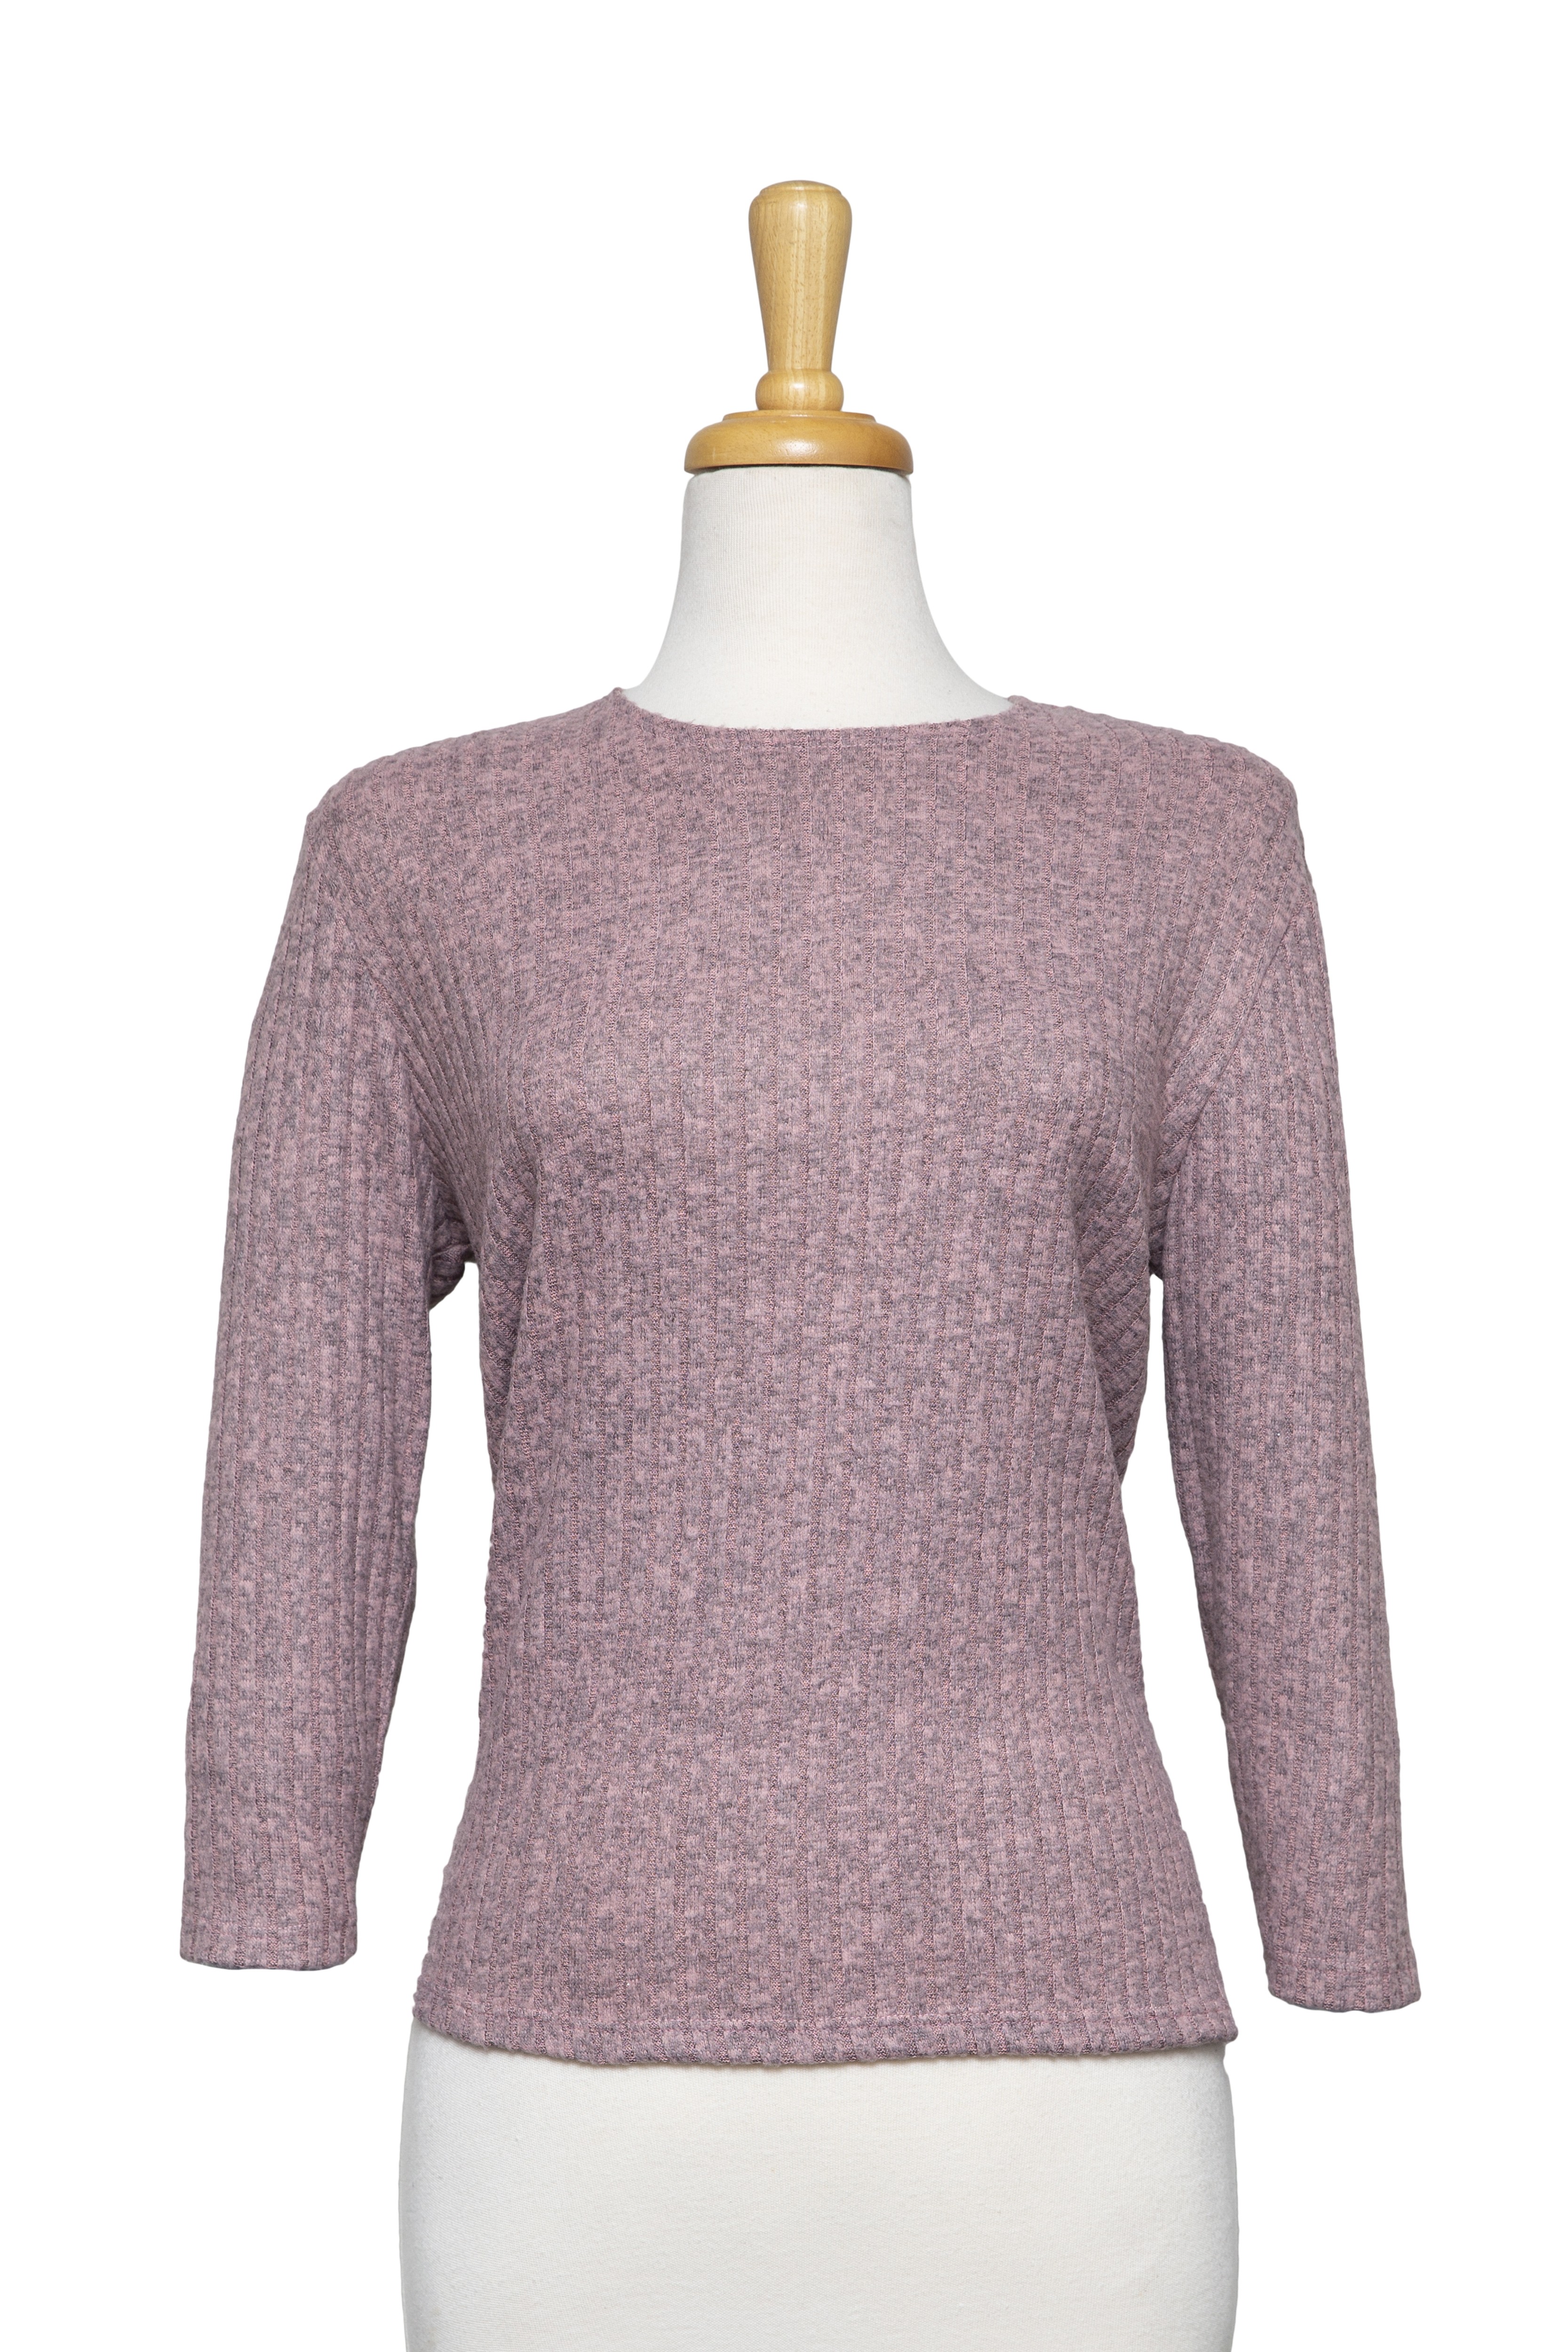 Plus Size Heather Mauve Ribbed 3/4 Sleeves Knit Top